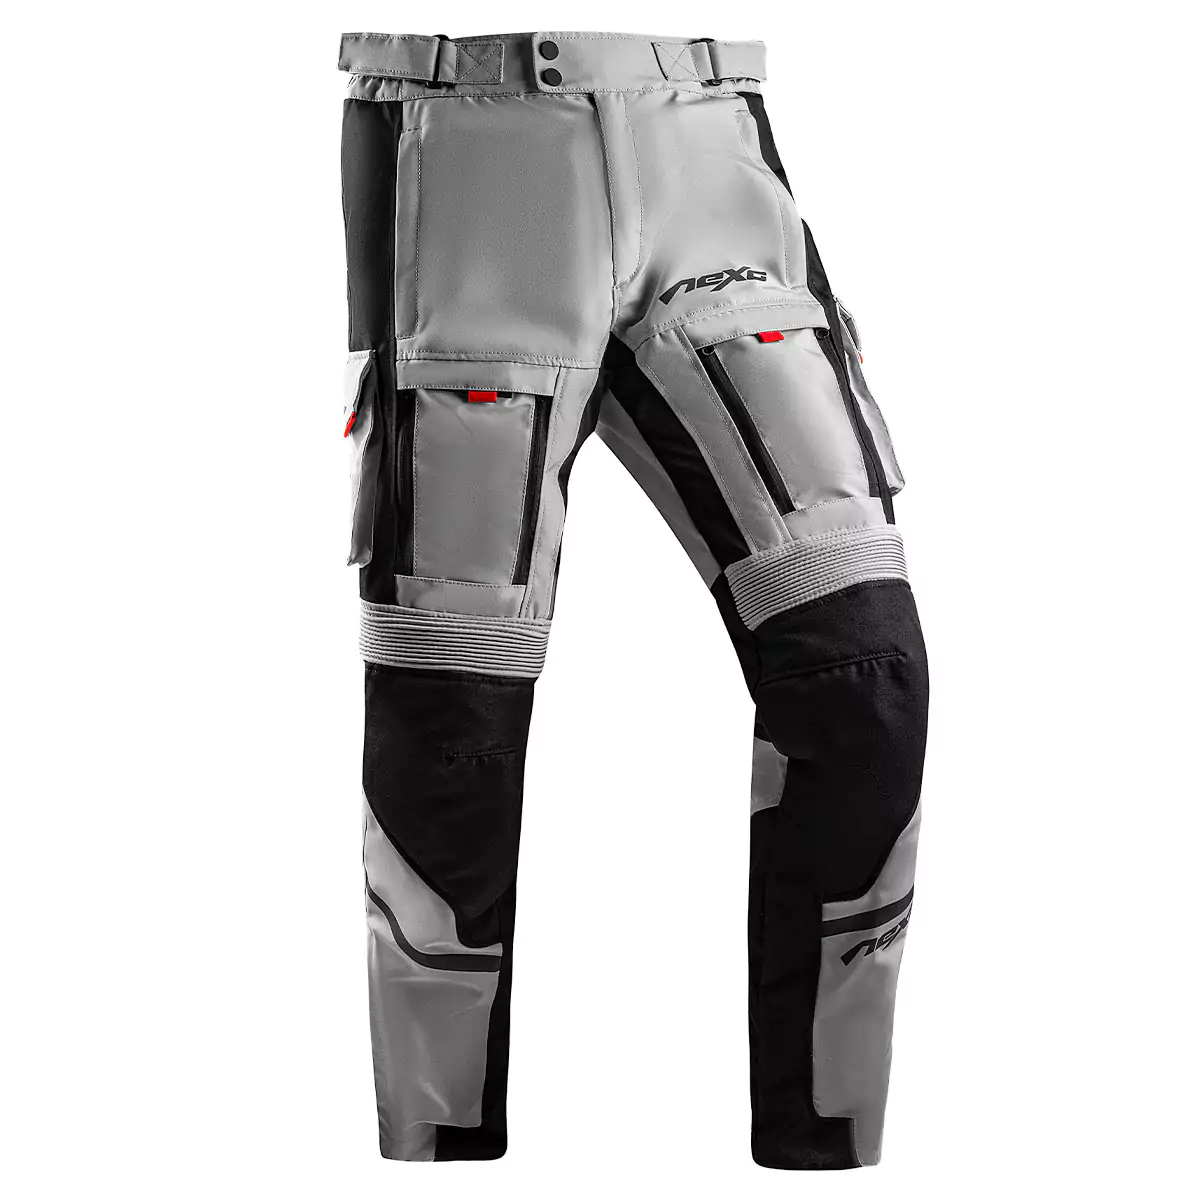 Grey and black color motorcycle textile pants with protective padding and adjustable straps.